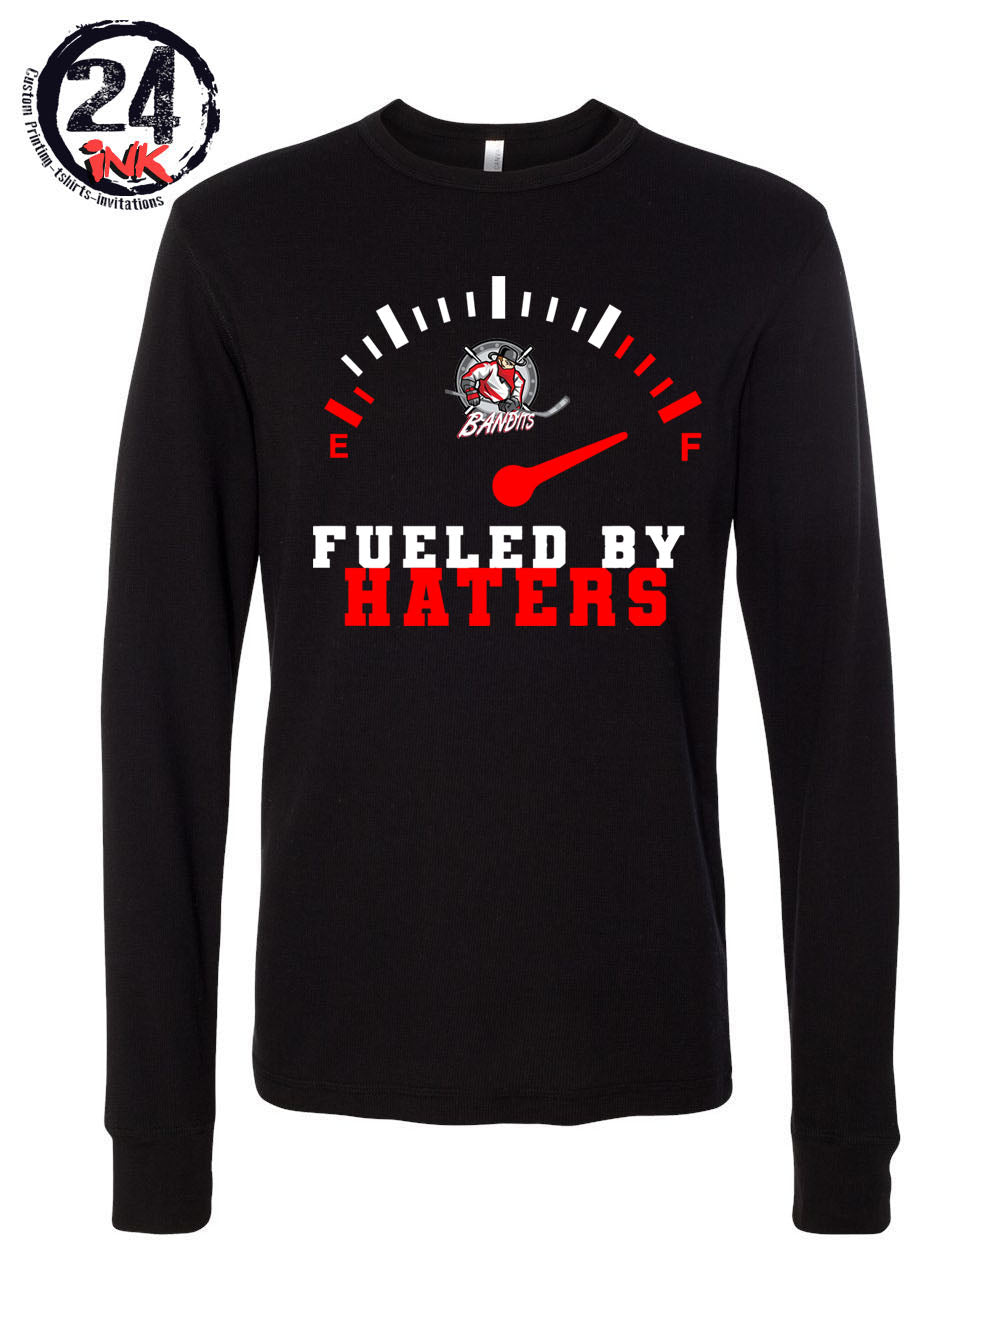 Fueled by Haters Shirt, Your Team Logo, Hockey